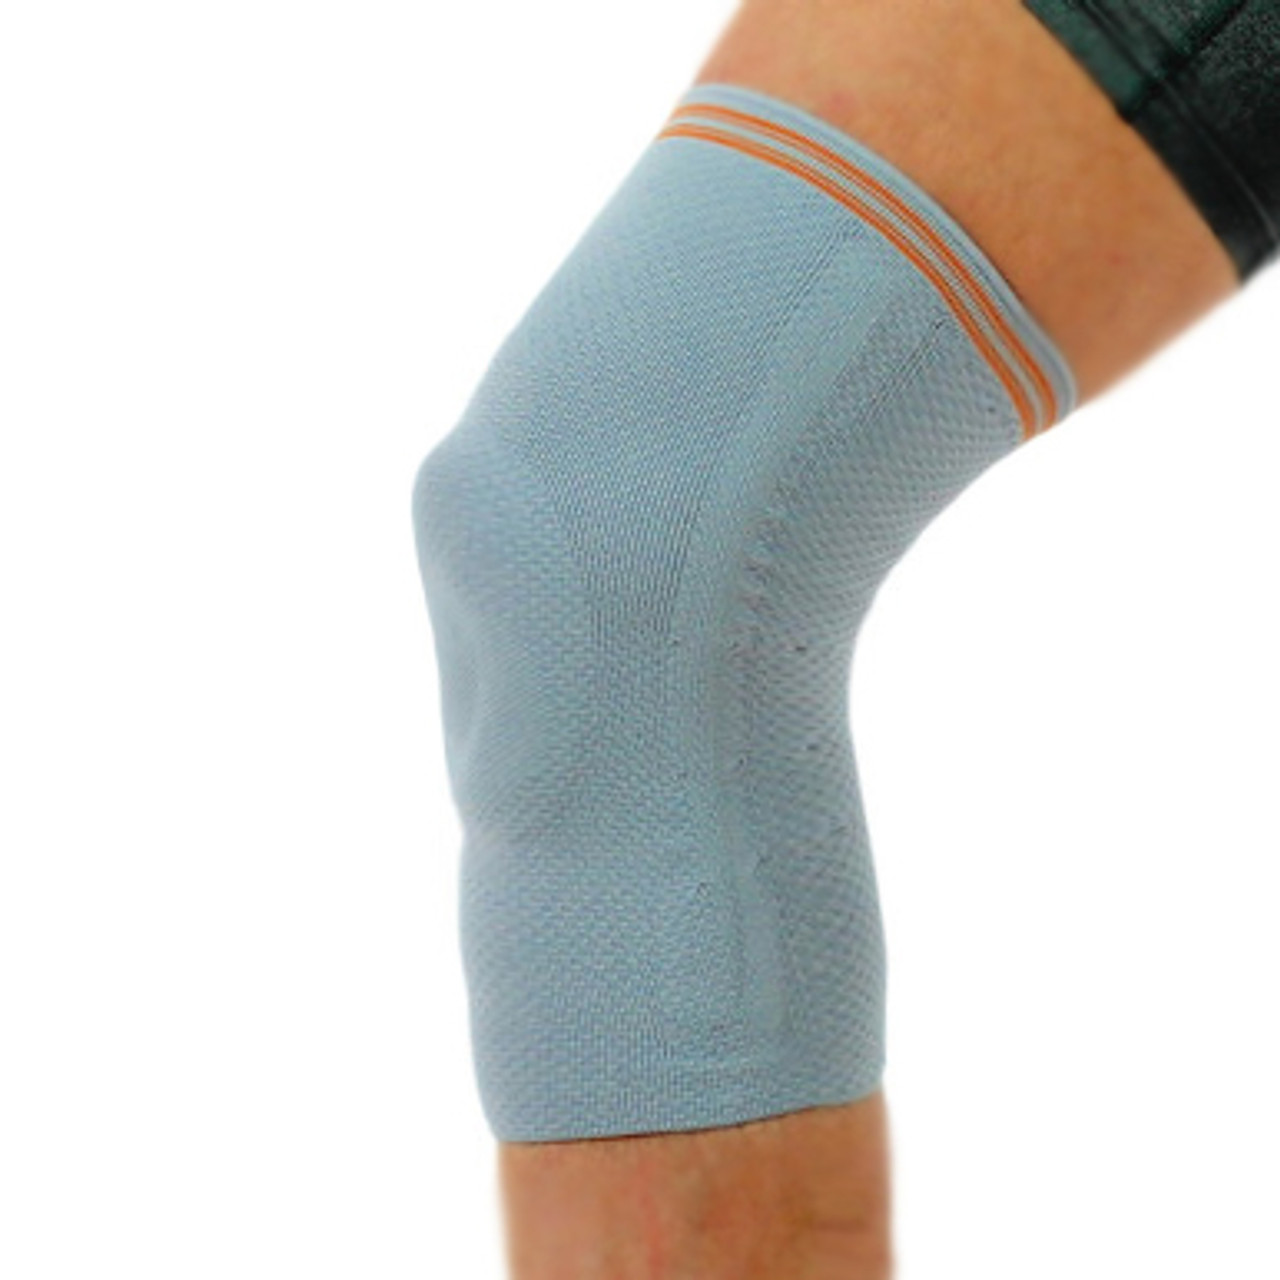 Adjustable 3D Knitted Elastic Compression Sleeve Knee Support with